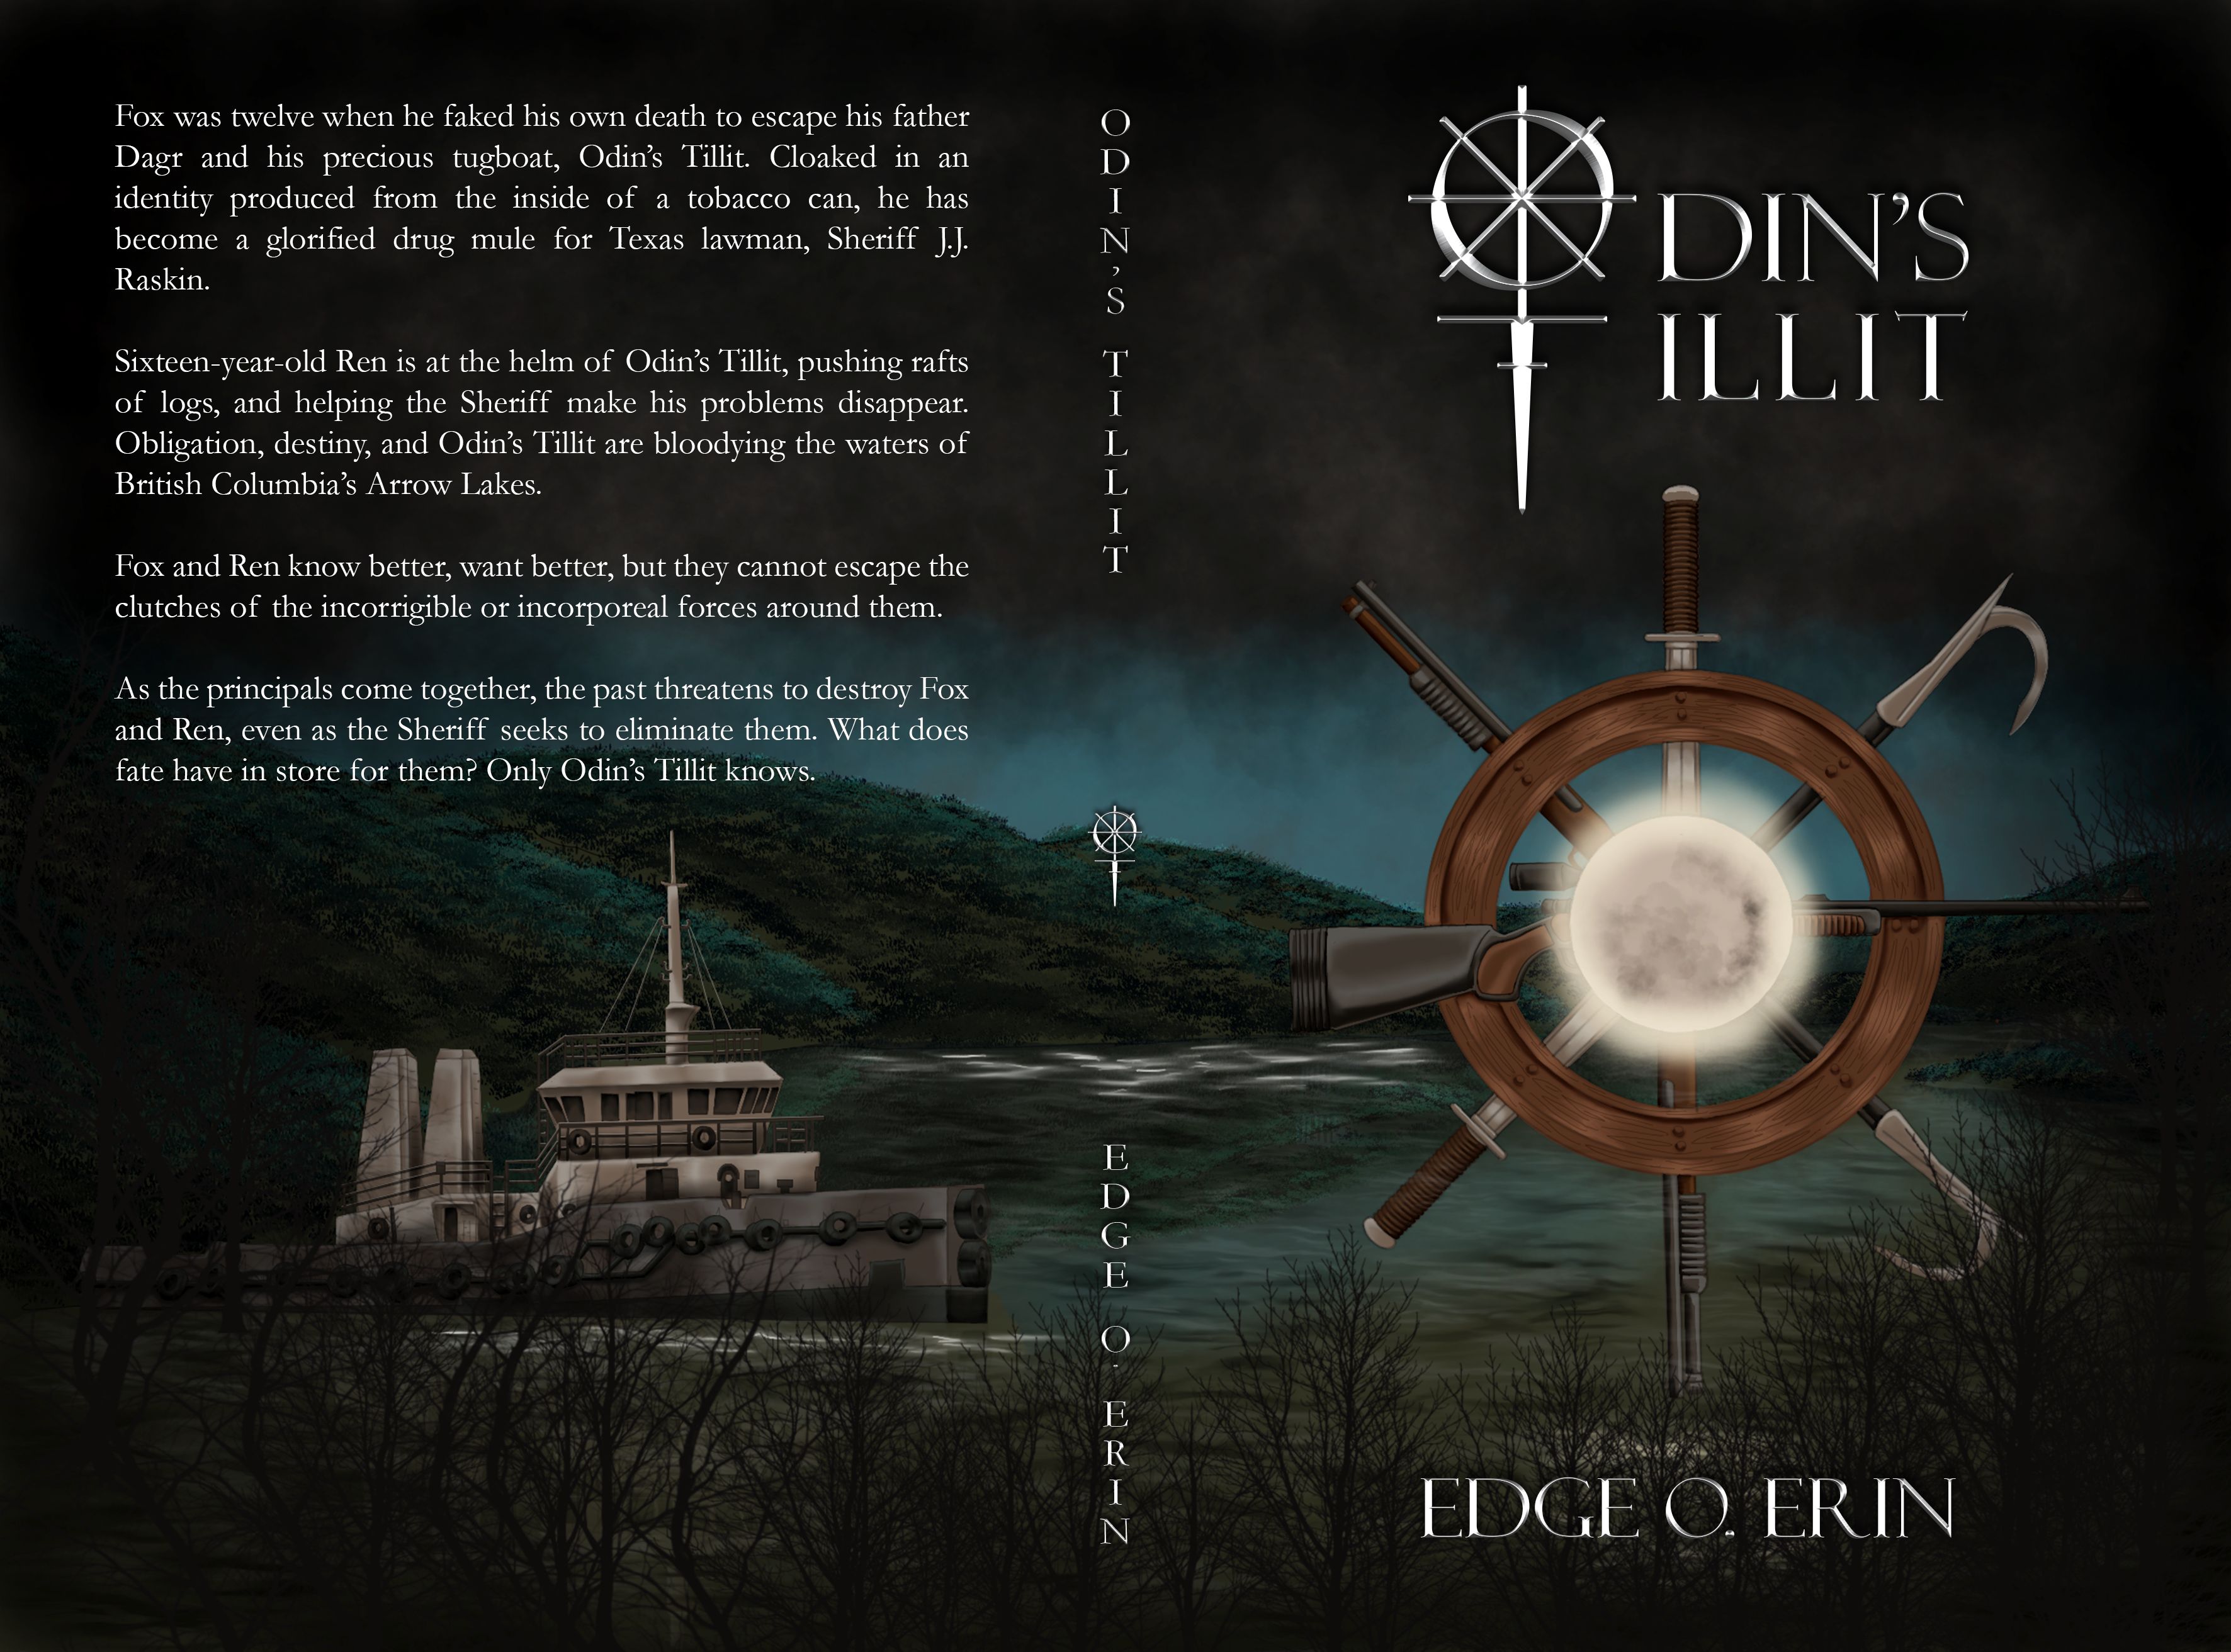 Hardcover for the book, Odin's Tillit, which is like Breaking Bad meets The Dark Tower